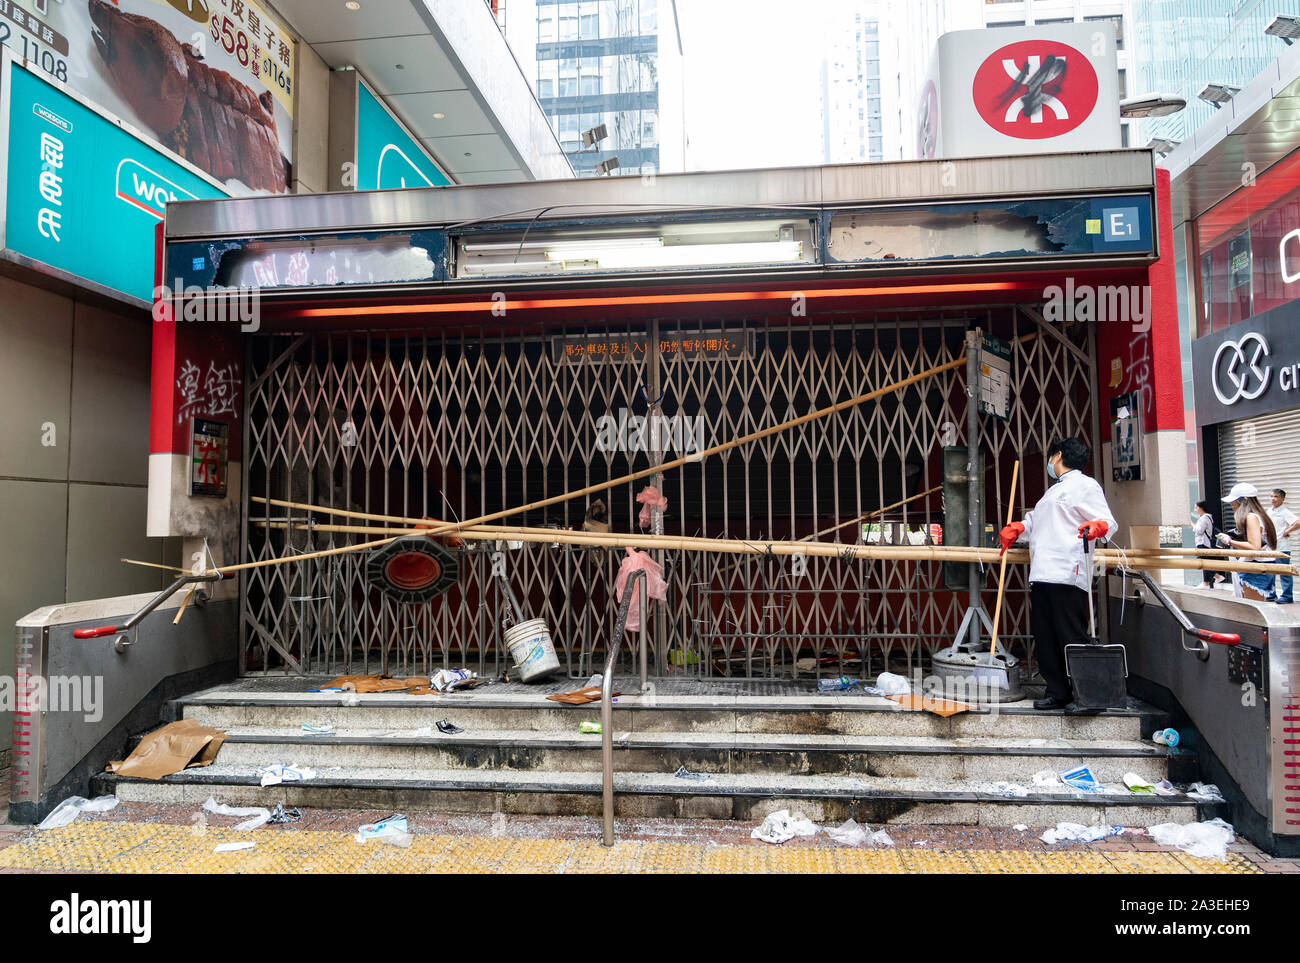 Kowloon, Hong Kong, China,. 7 October, 2019. After a night of violent confrontations between police and pro-democracy protestors in MongKok and YauMaTei in Kowloon, many MTR railway stations and what are thought to be pro-Beijing business franchises were vandalised. Entrance to Mongkok MTR station vandalised. Stock Photo